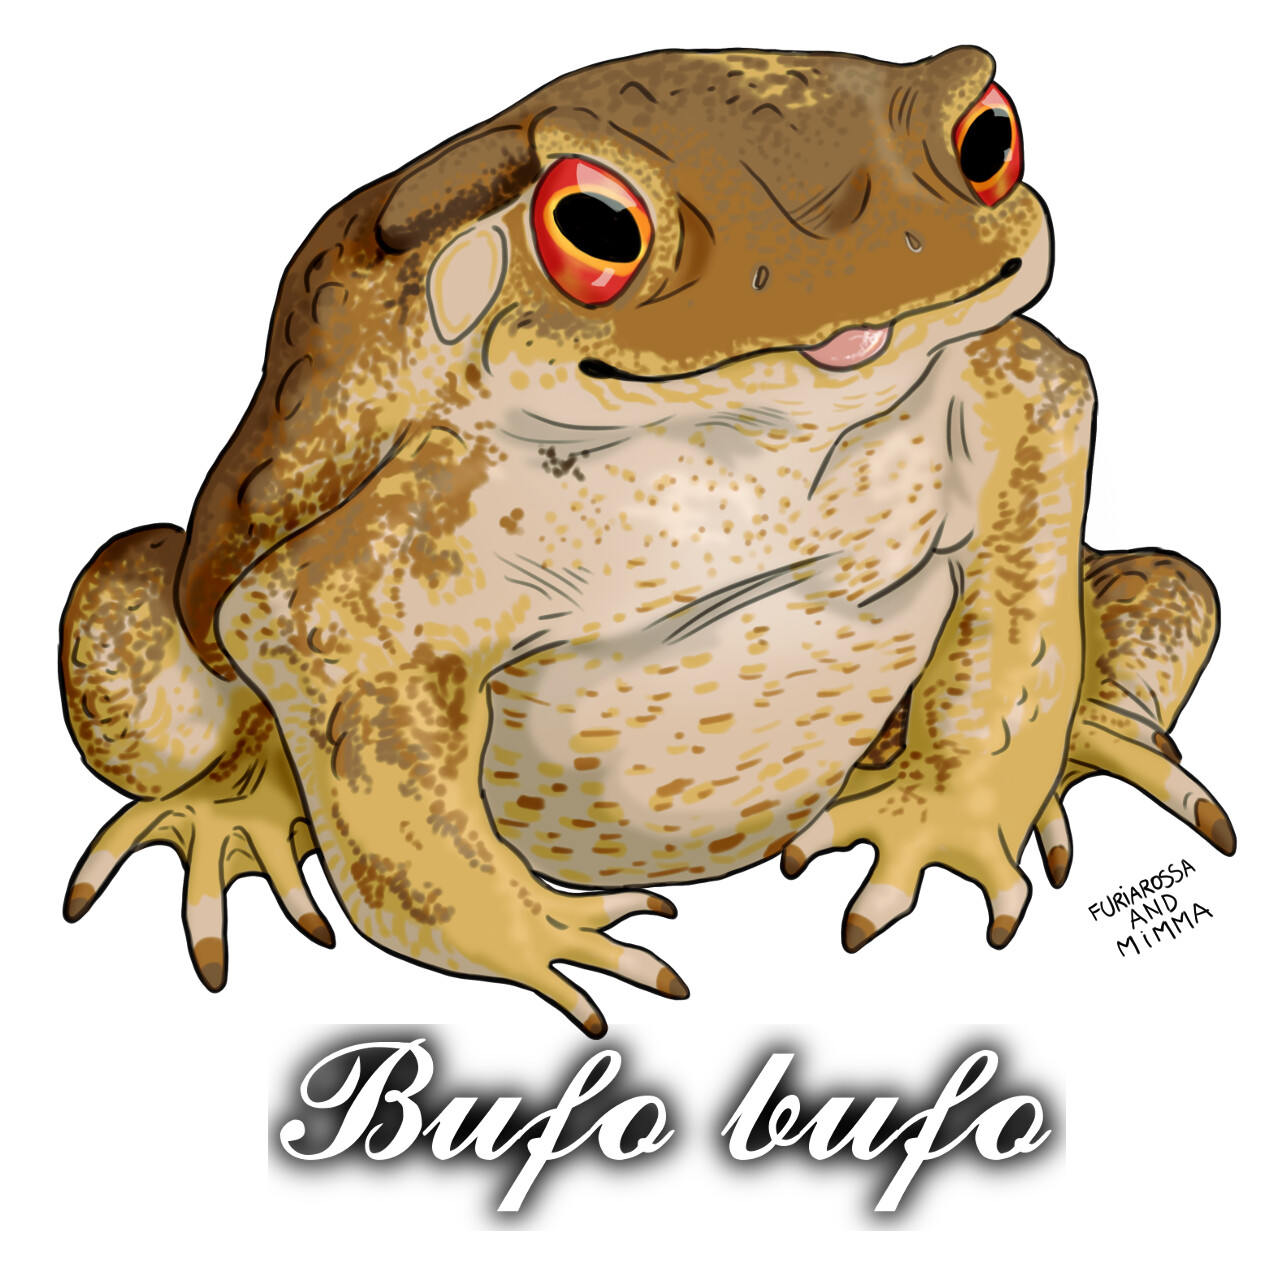 Our favorite boy, the common European Toad (bufo bufo). It was so relaxing coloring this skin &lt;3